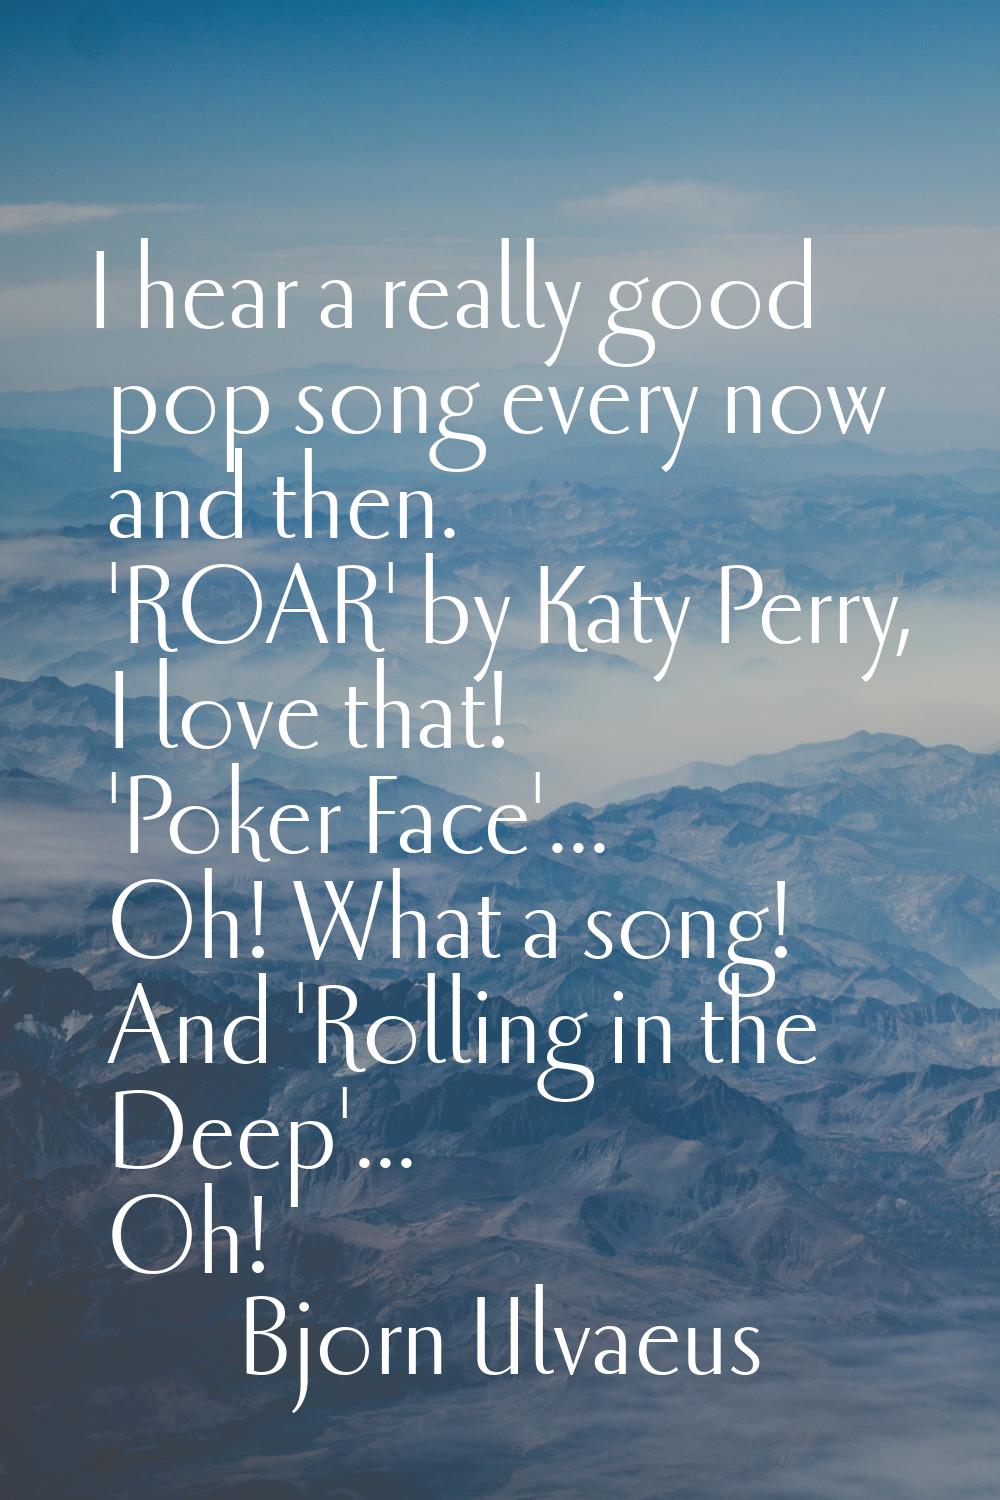 I hear a really good pop song every now and then. 'ROAR' by Katy Perry, I love that! 'Poker Face'..